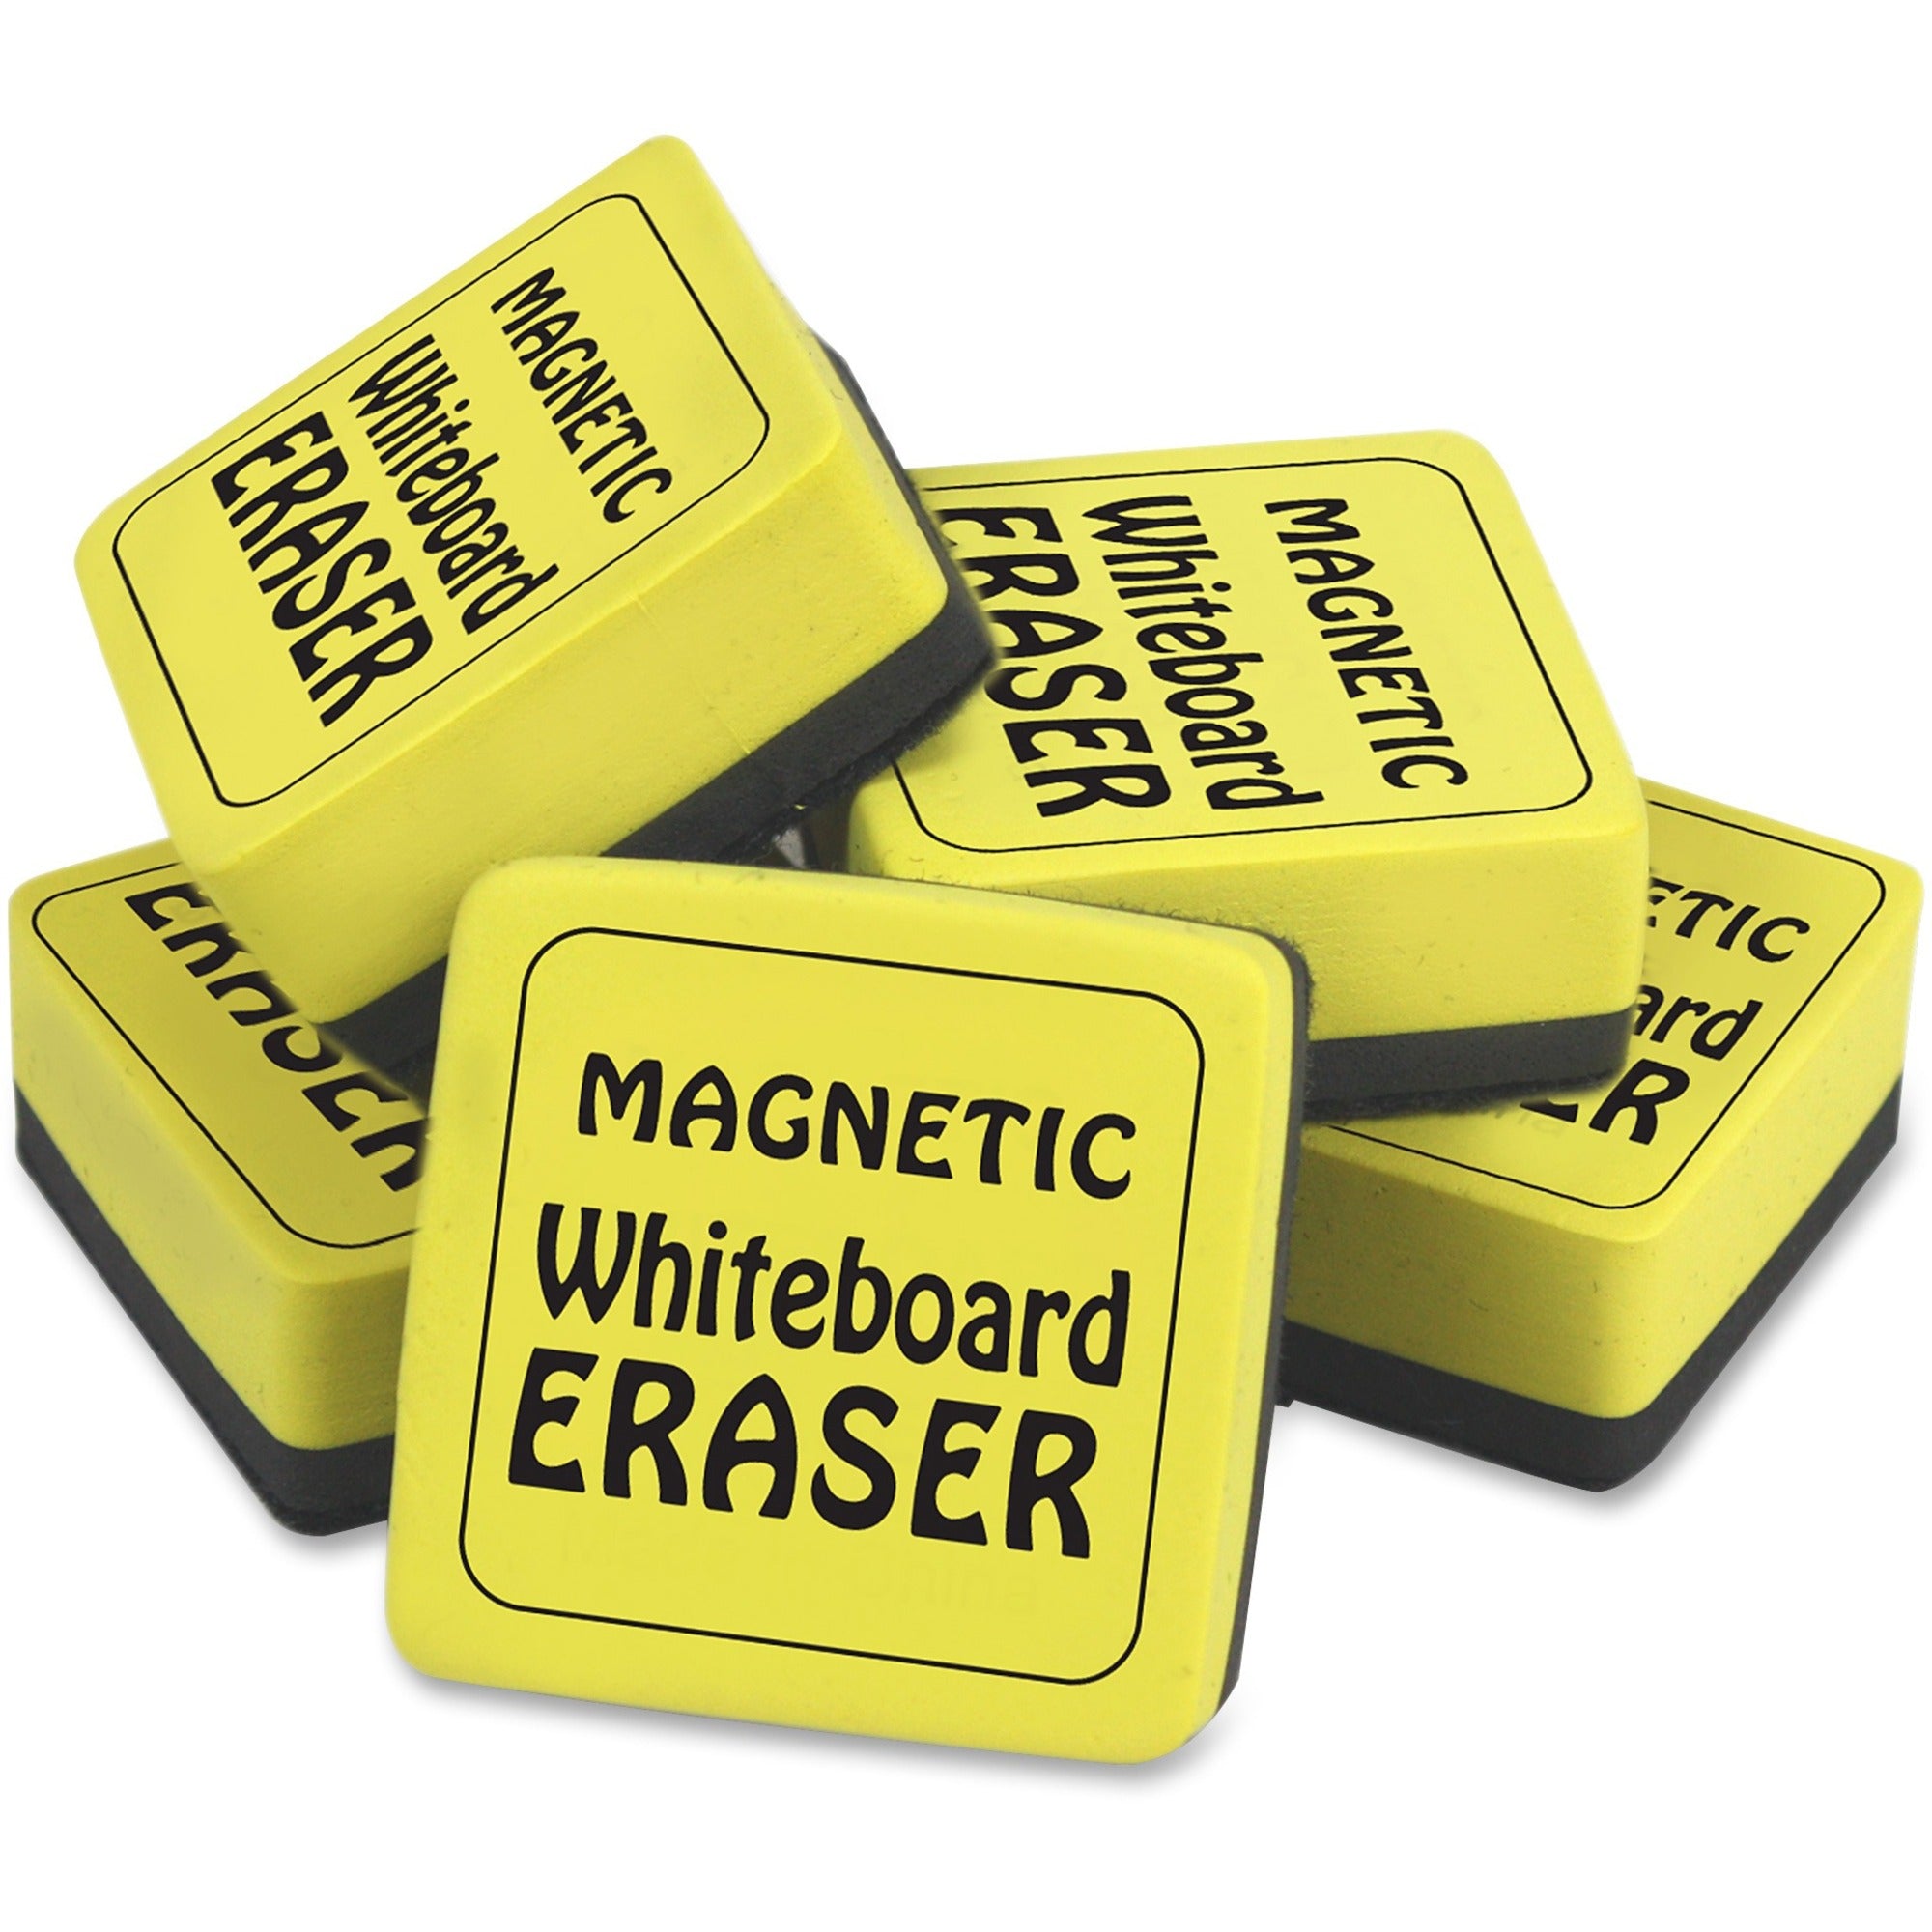 The Pencil Grip Magnetic Whiteboard Eraser Class Pack - 2" Width x 2" Length - Durable, Soft, Magnetic - Yellow - 24 / Pack - 